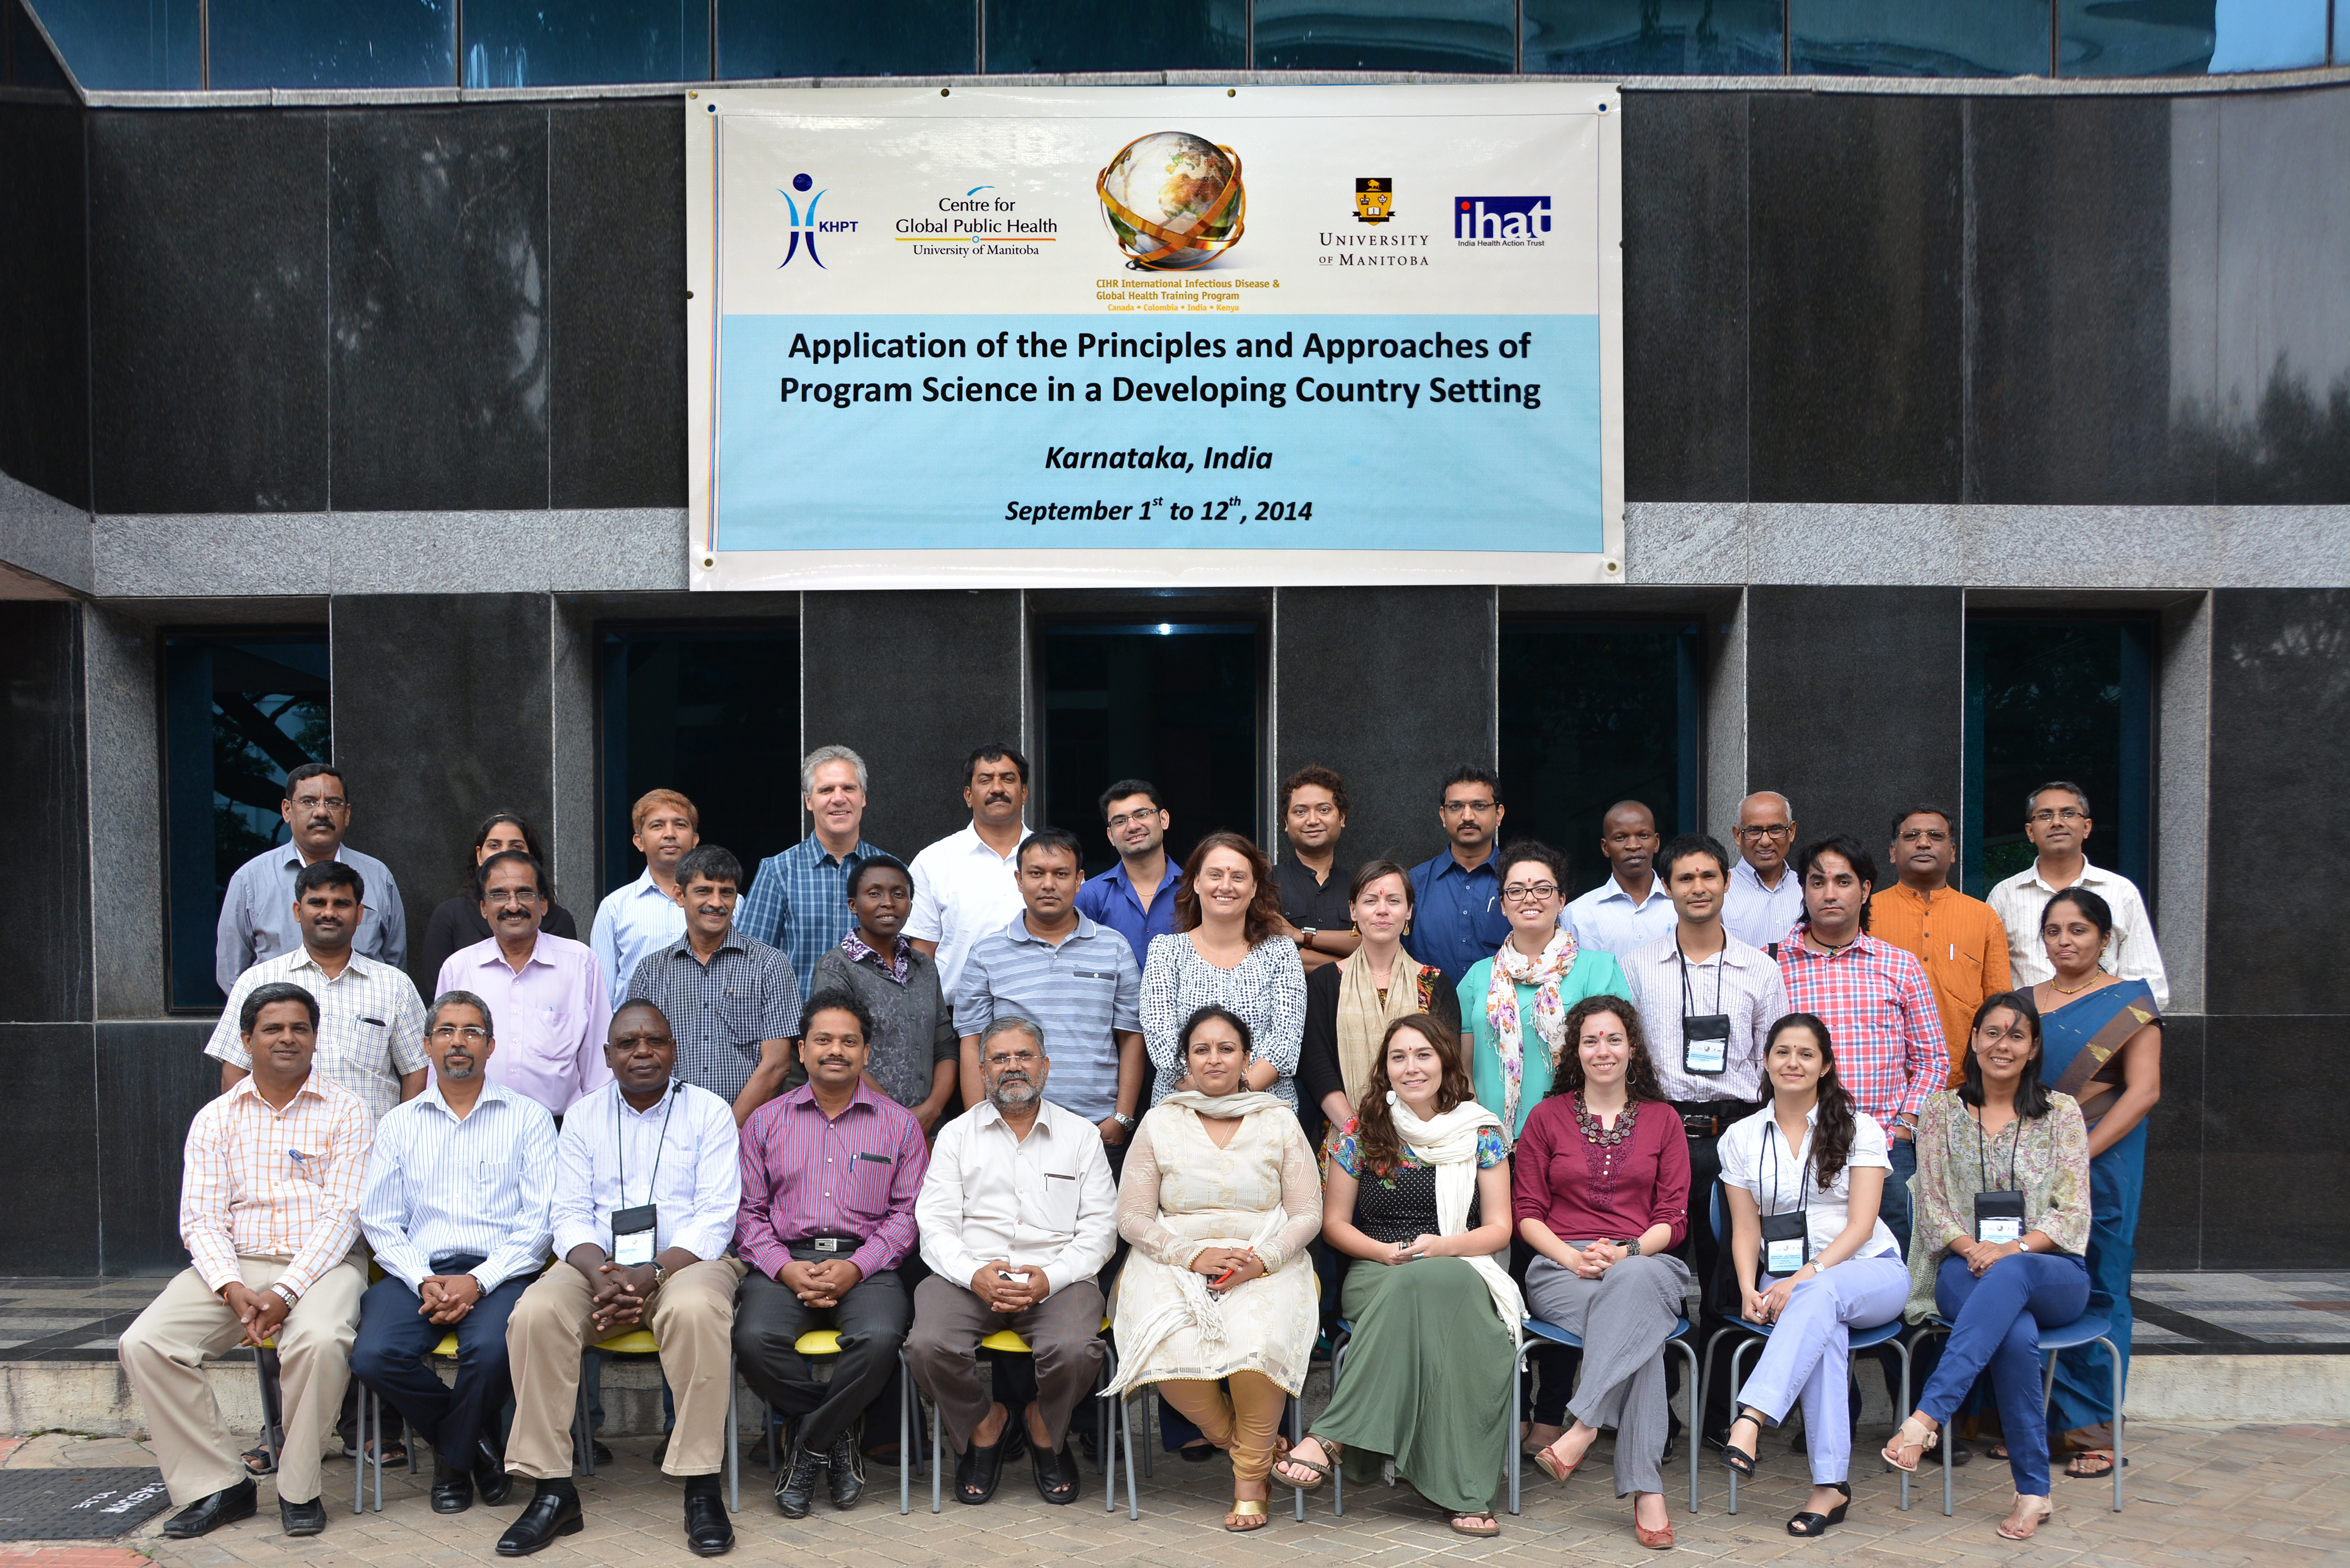 A group picture of all those attending the major course offering in Bangalore, India in September 2014.